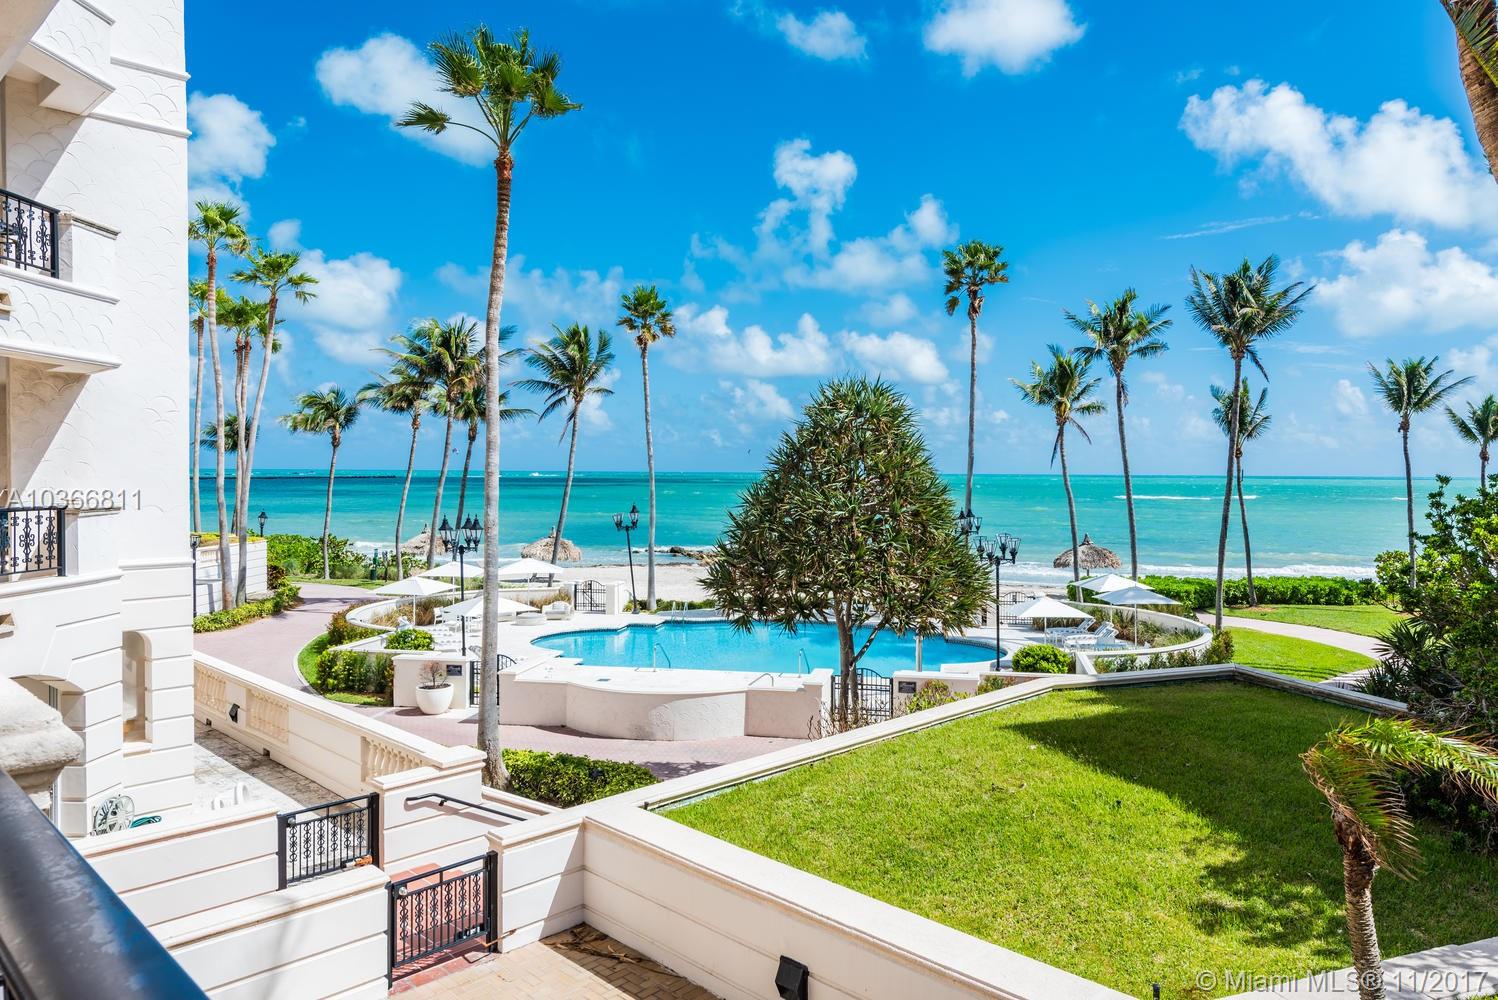 Fisher Island’s Top 3 to 4 Bedroom Units under $4 million